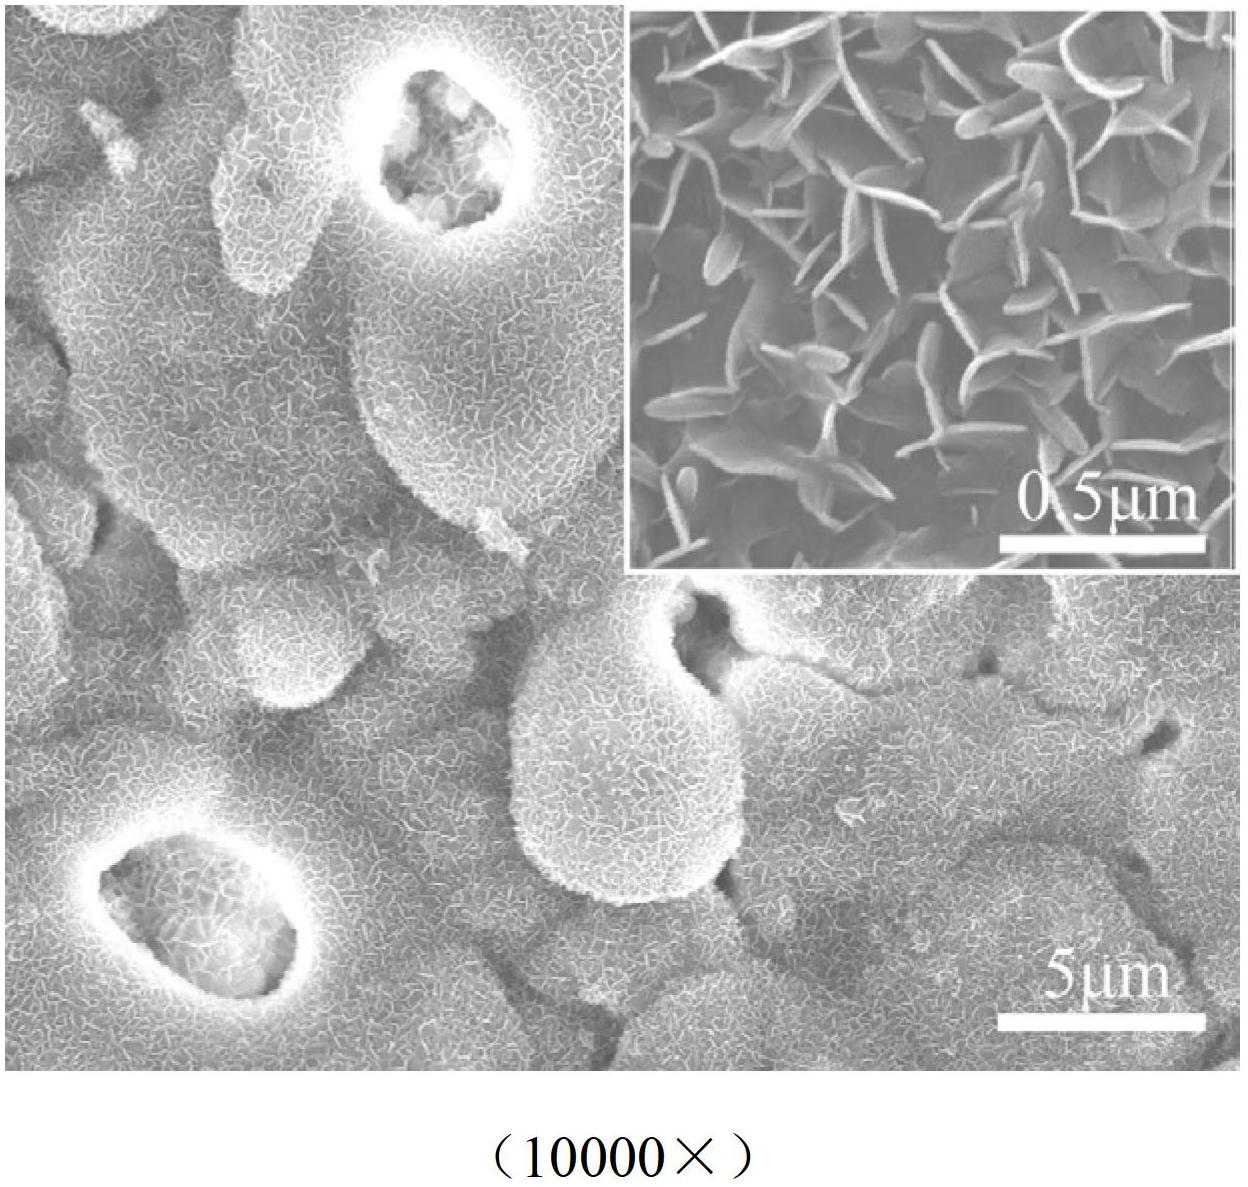 Process for preparing compact magnesium oxide/hydroxyapatite nano fiber double-layer coating on surface of magnesium base